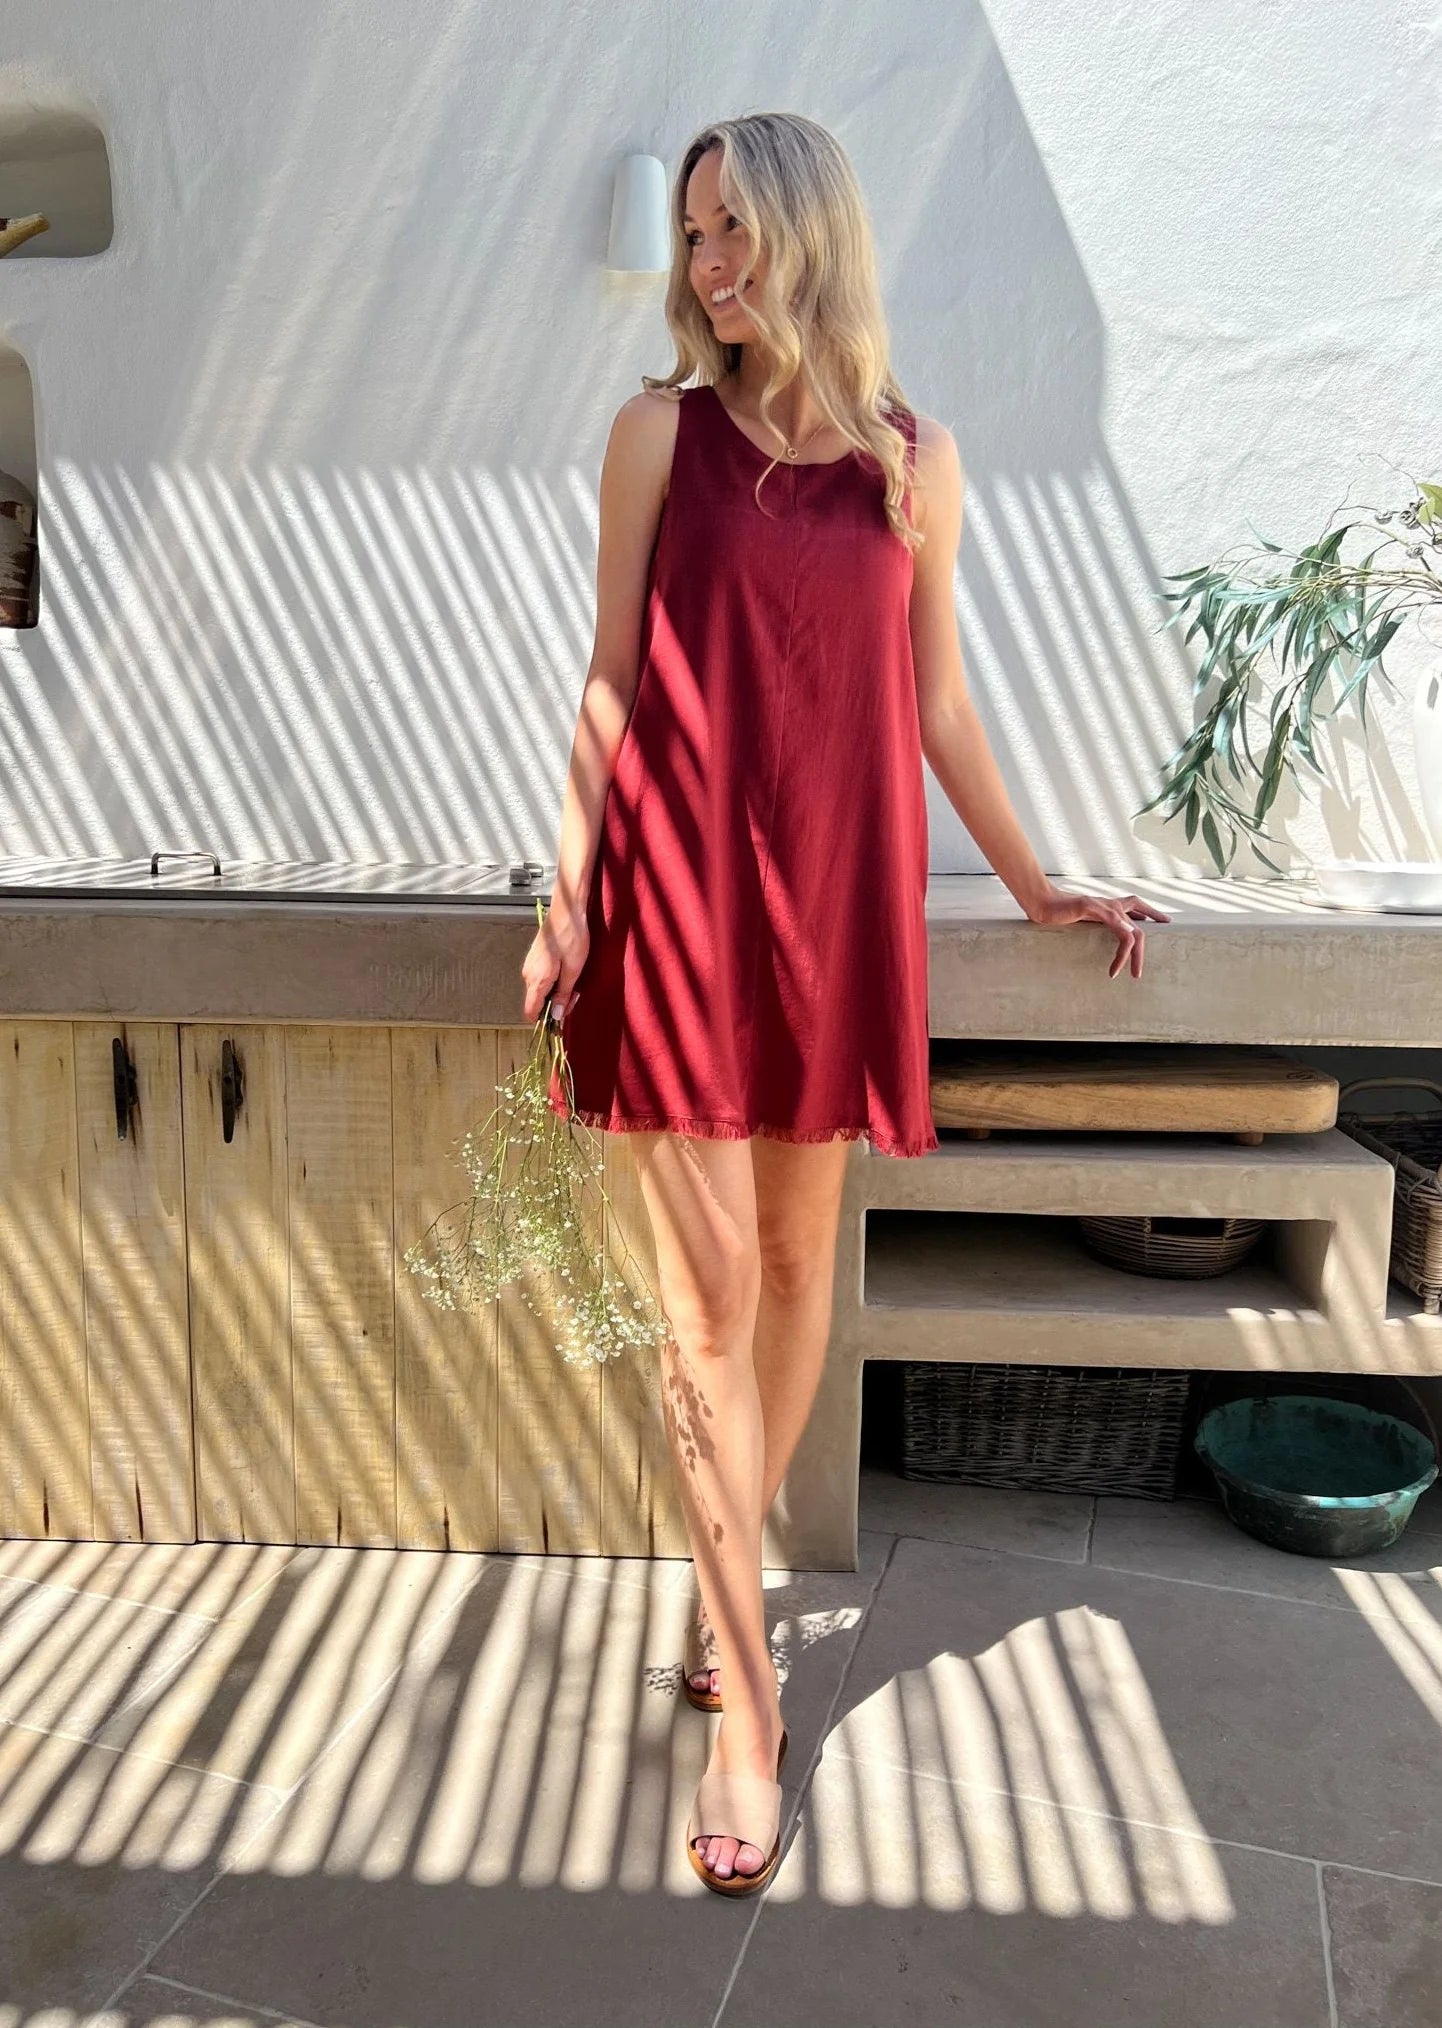 Be inspired by the beauty of nature with this Freya Mini Dress. Featuring a gorgeous Paprika Print, a frayed hem, and pockets, this shift fit dress is both stylish and practical. Its lightweight fabric is fully lined to keep you feeling comfortable and looking chic all day long. Perfect for any occasion.